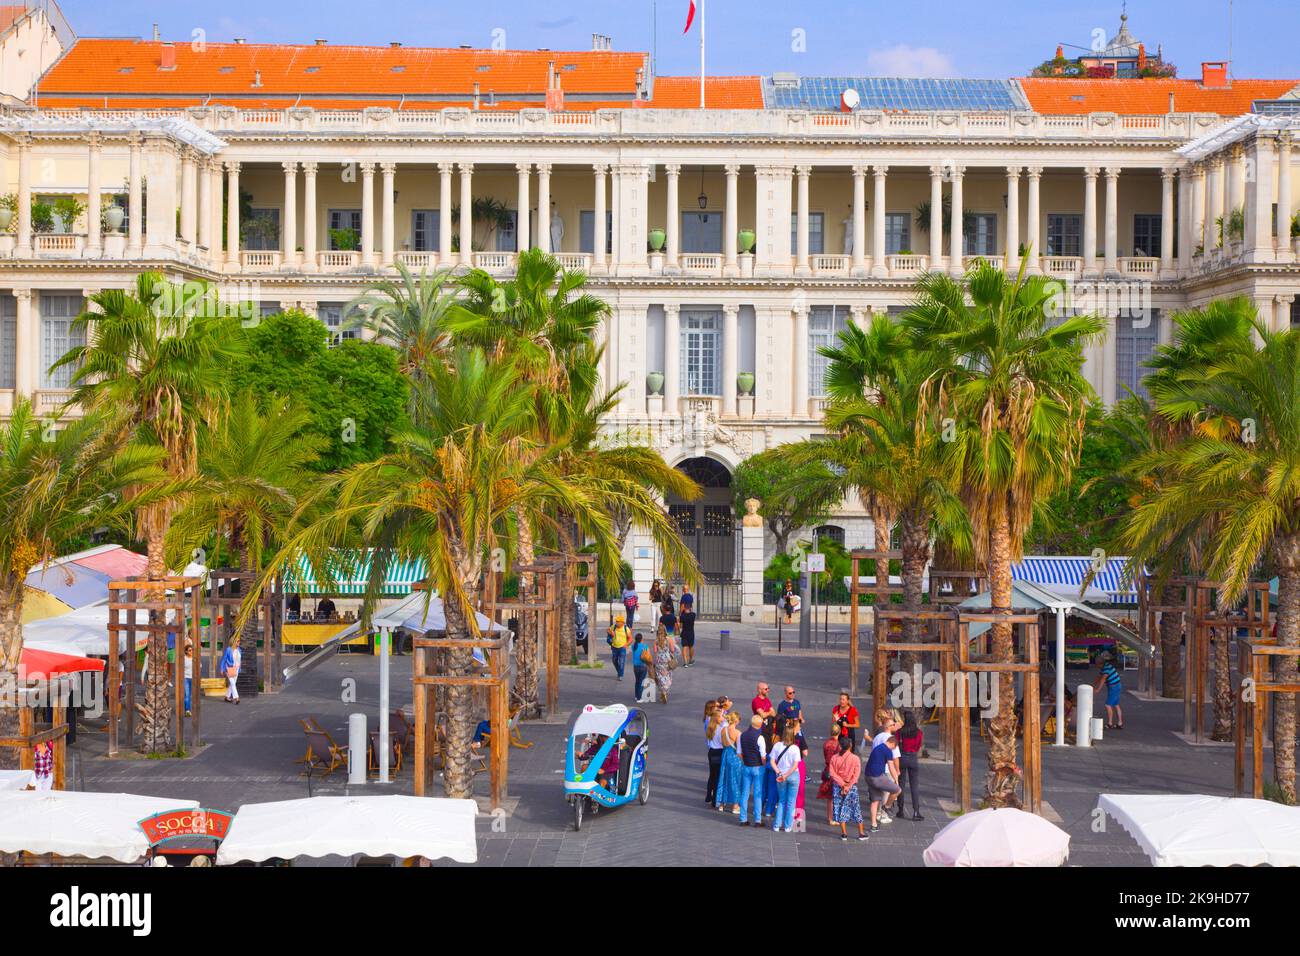 France, Cote d'Azur, Nice, Cours Saleya, Préfecture, Stock Photo